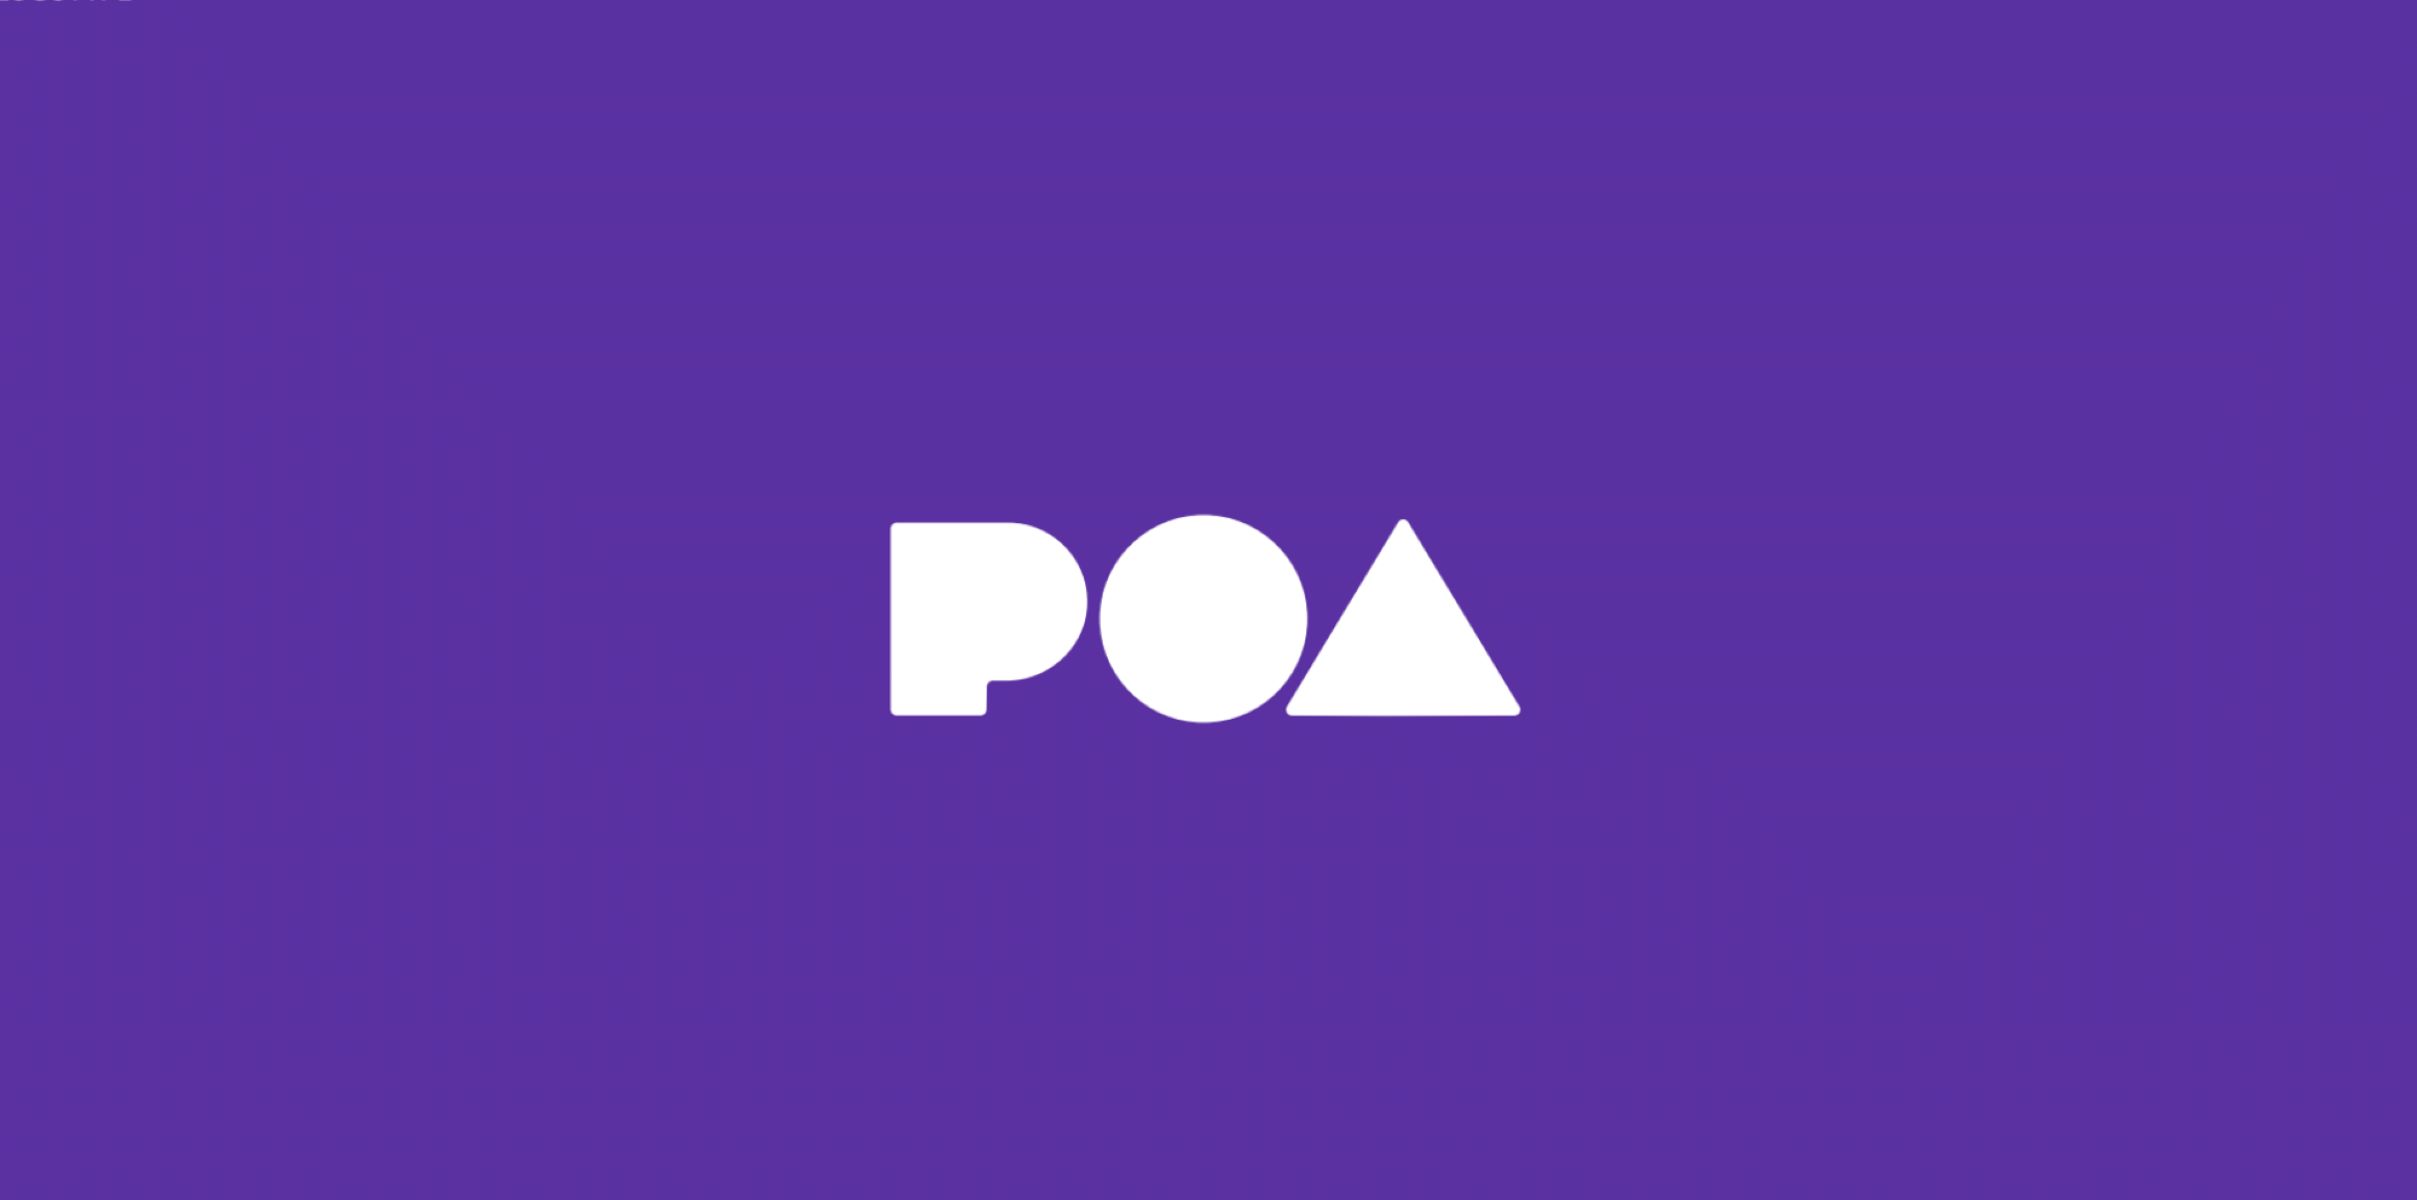 20-mind-blowing-facts-about-poa-network-poa